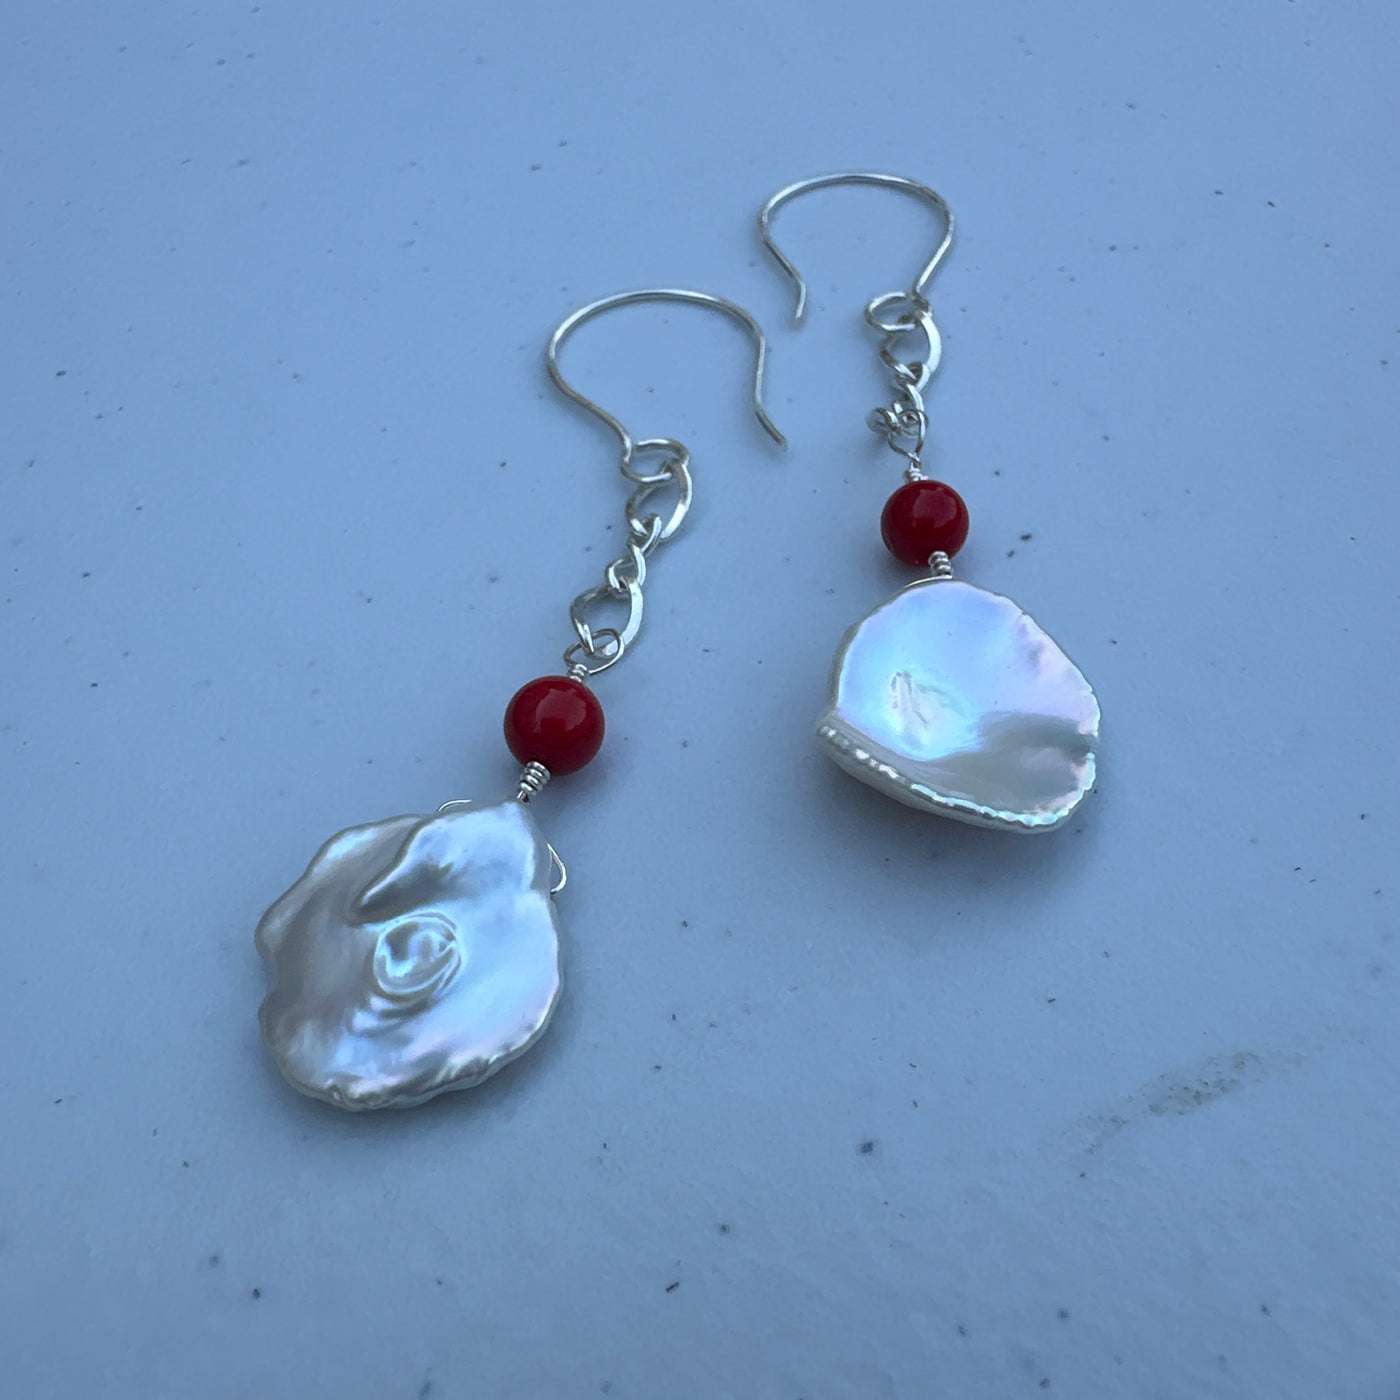 Baroque mother pearls and corals earrings on silver